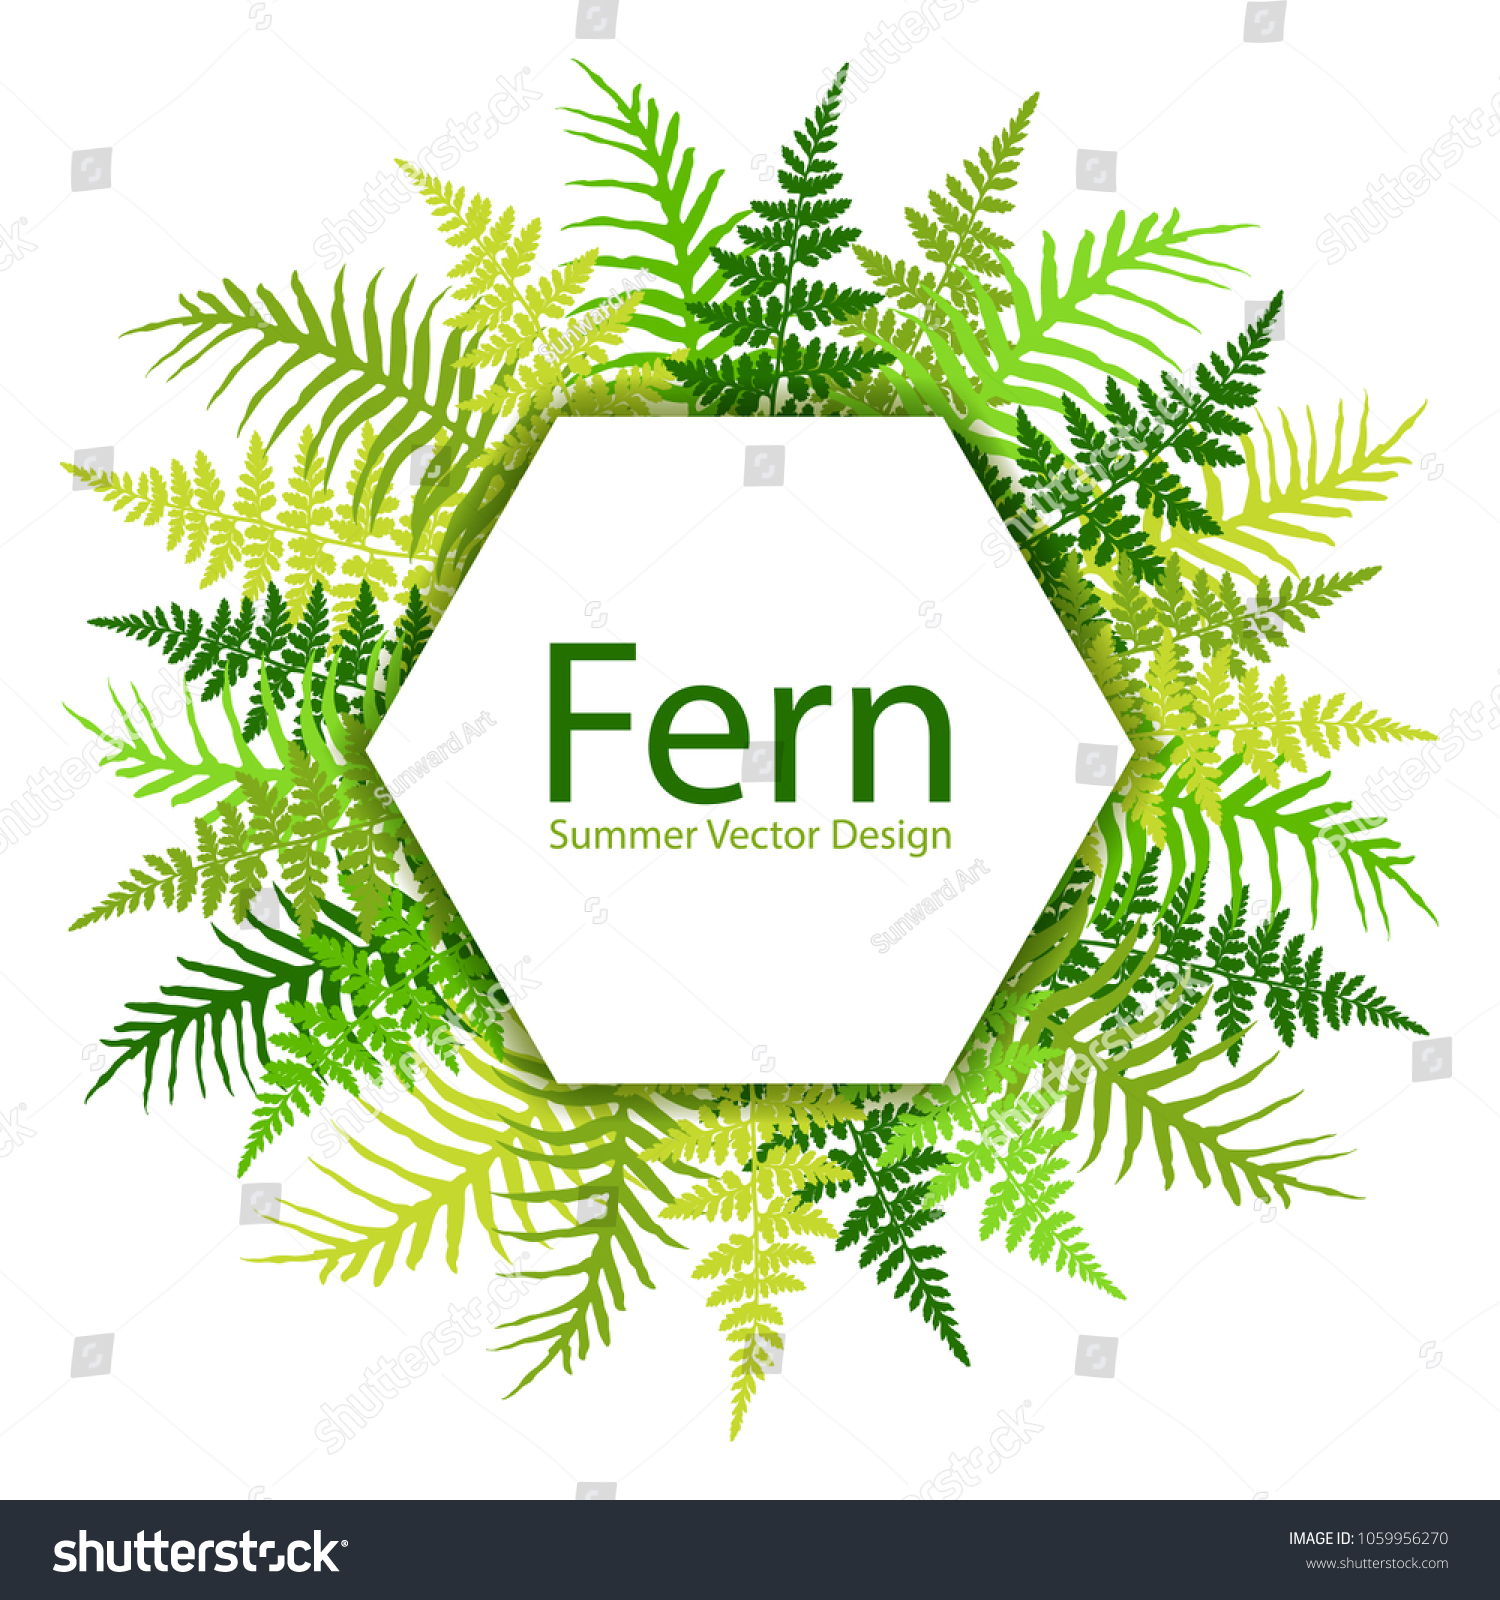 Fern Frond Tropical Leaves Frame Vector Stock Vector Royalty Free 1059956270 Shutterstock 3042